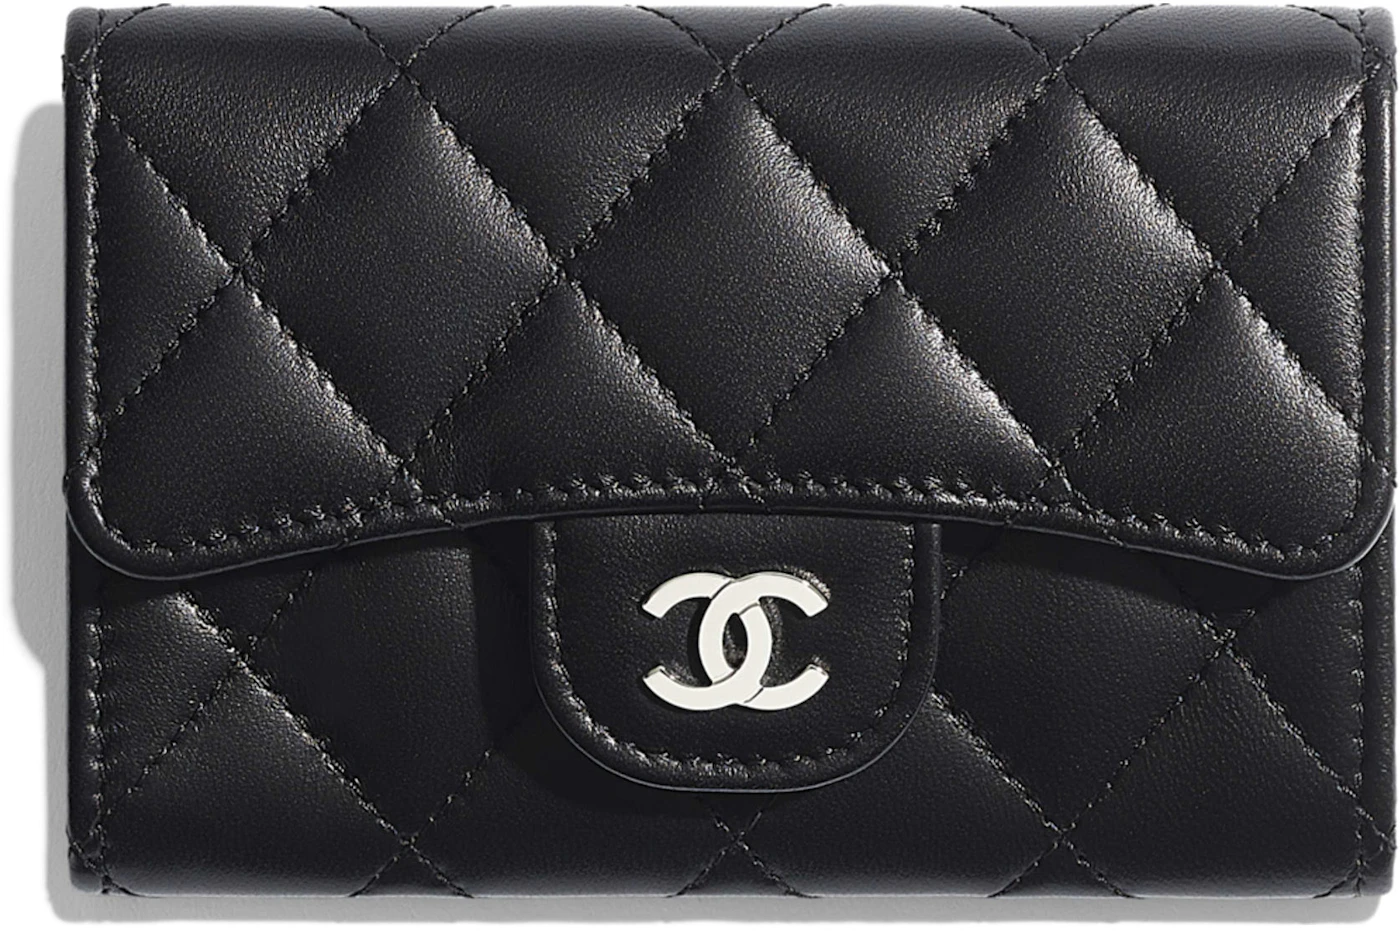 CHANEL CLASSIC CARD HOLDER / CARD WALLET